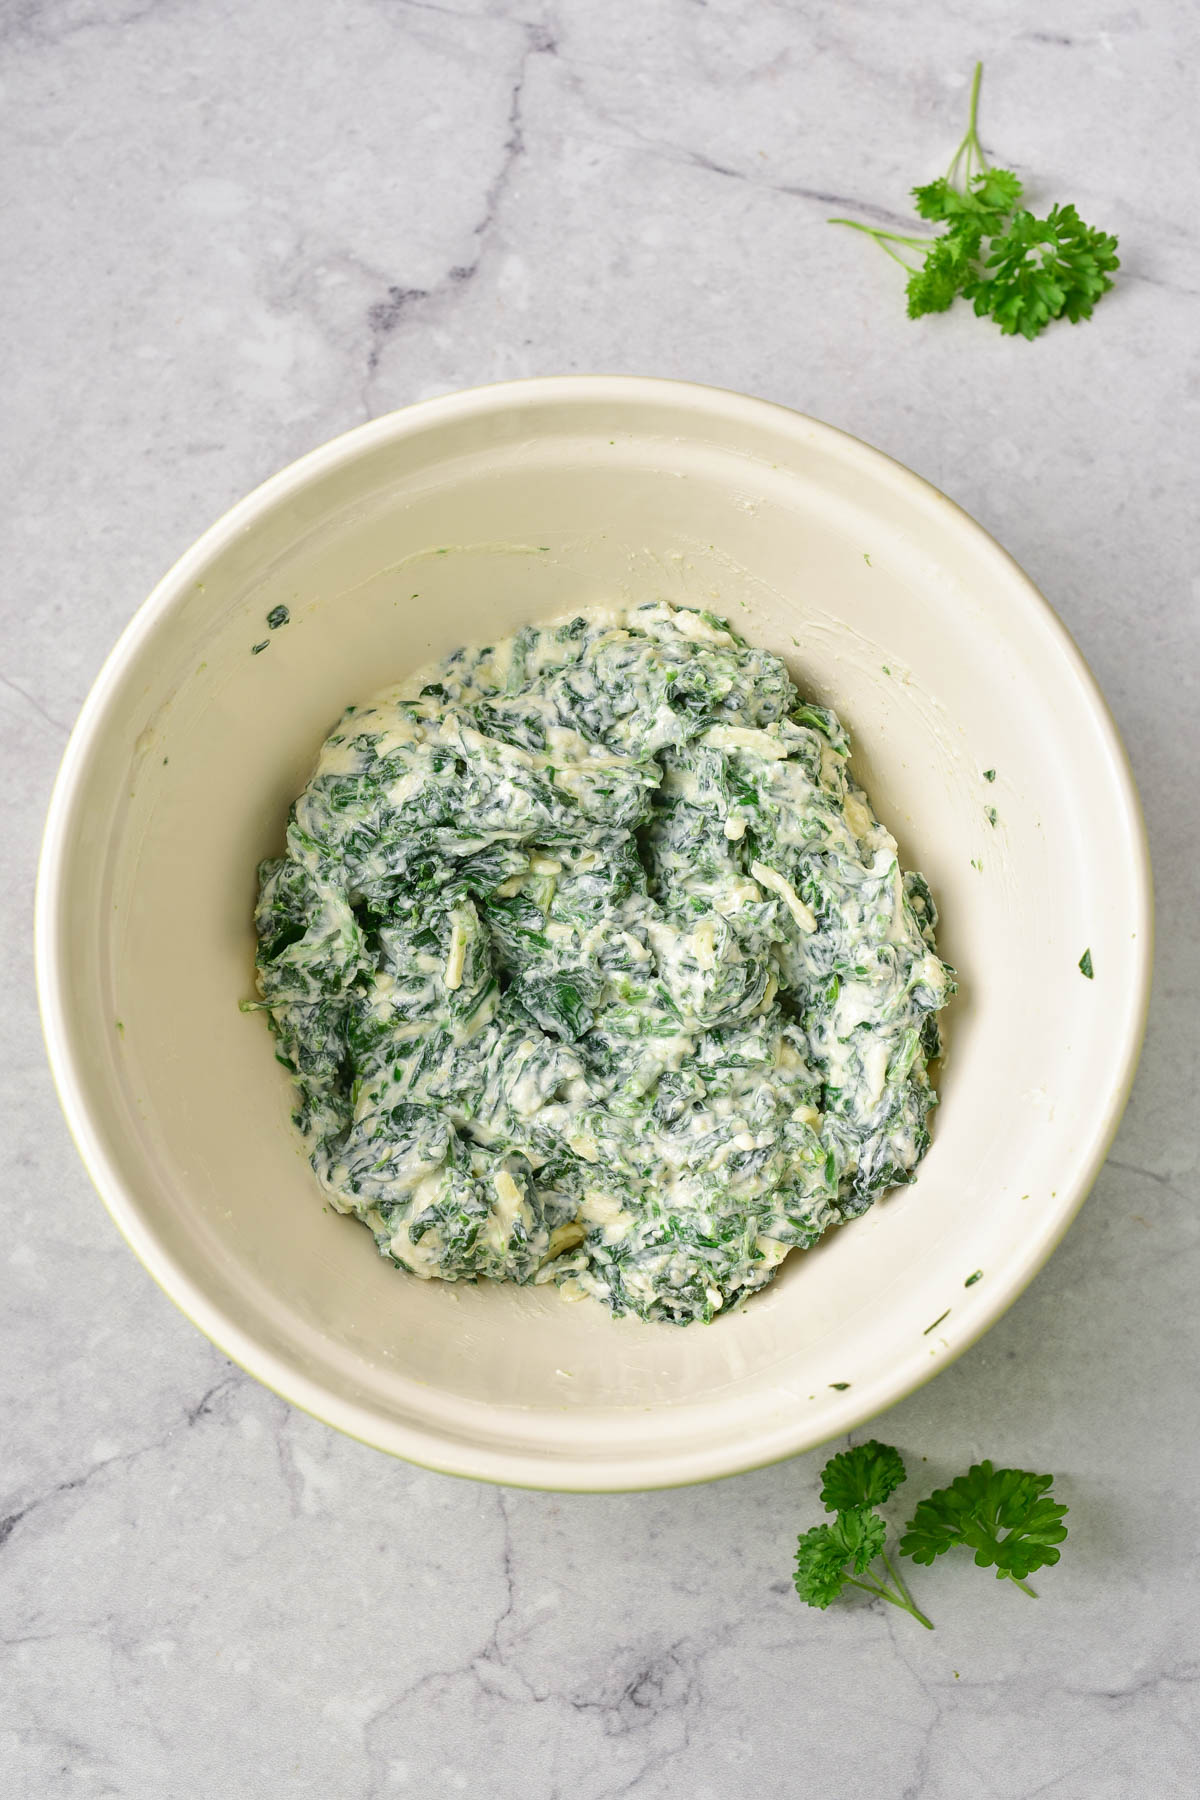 Cold spinach dip in bowl